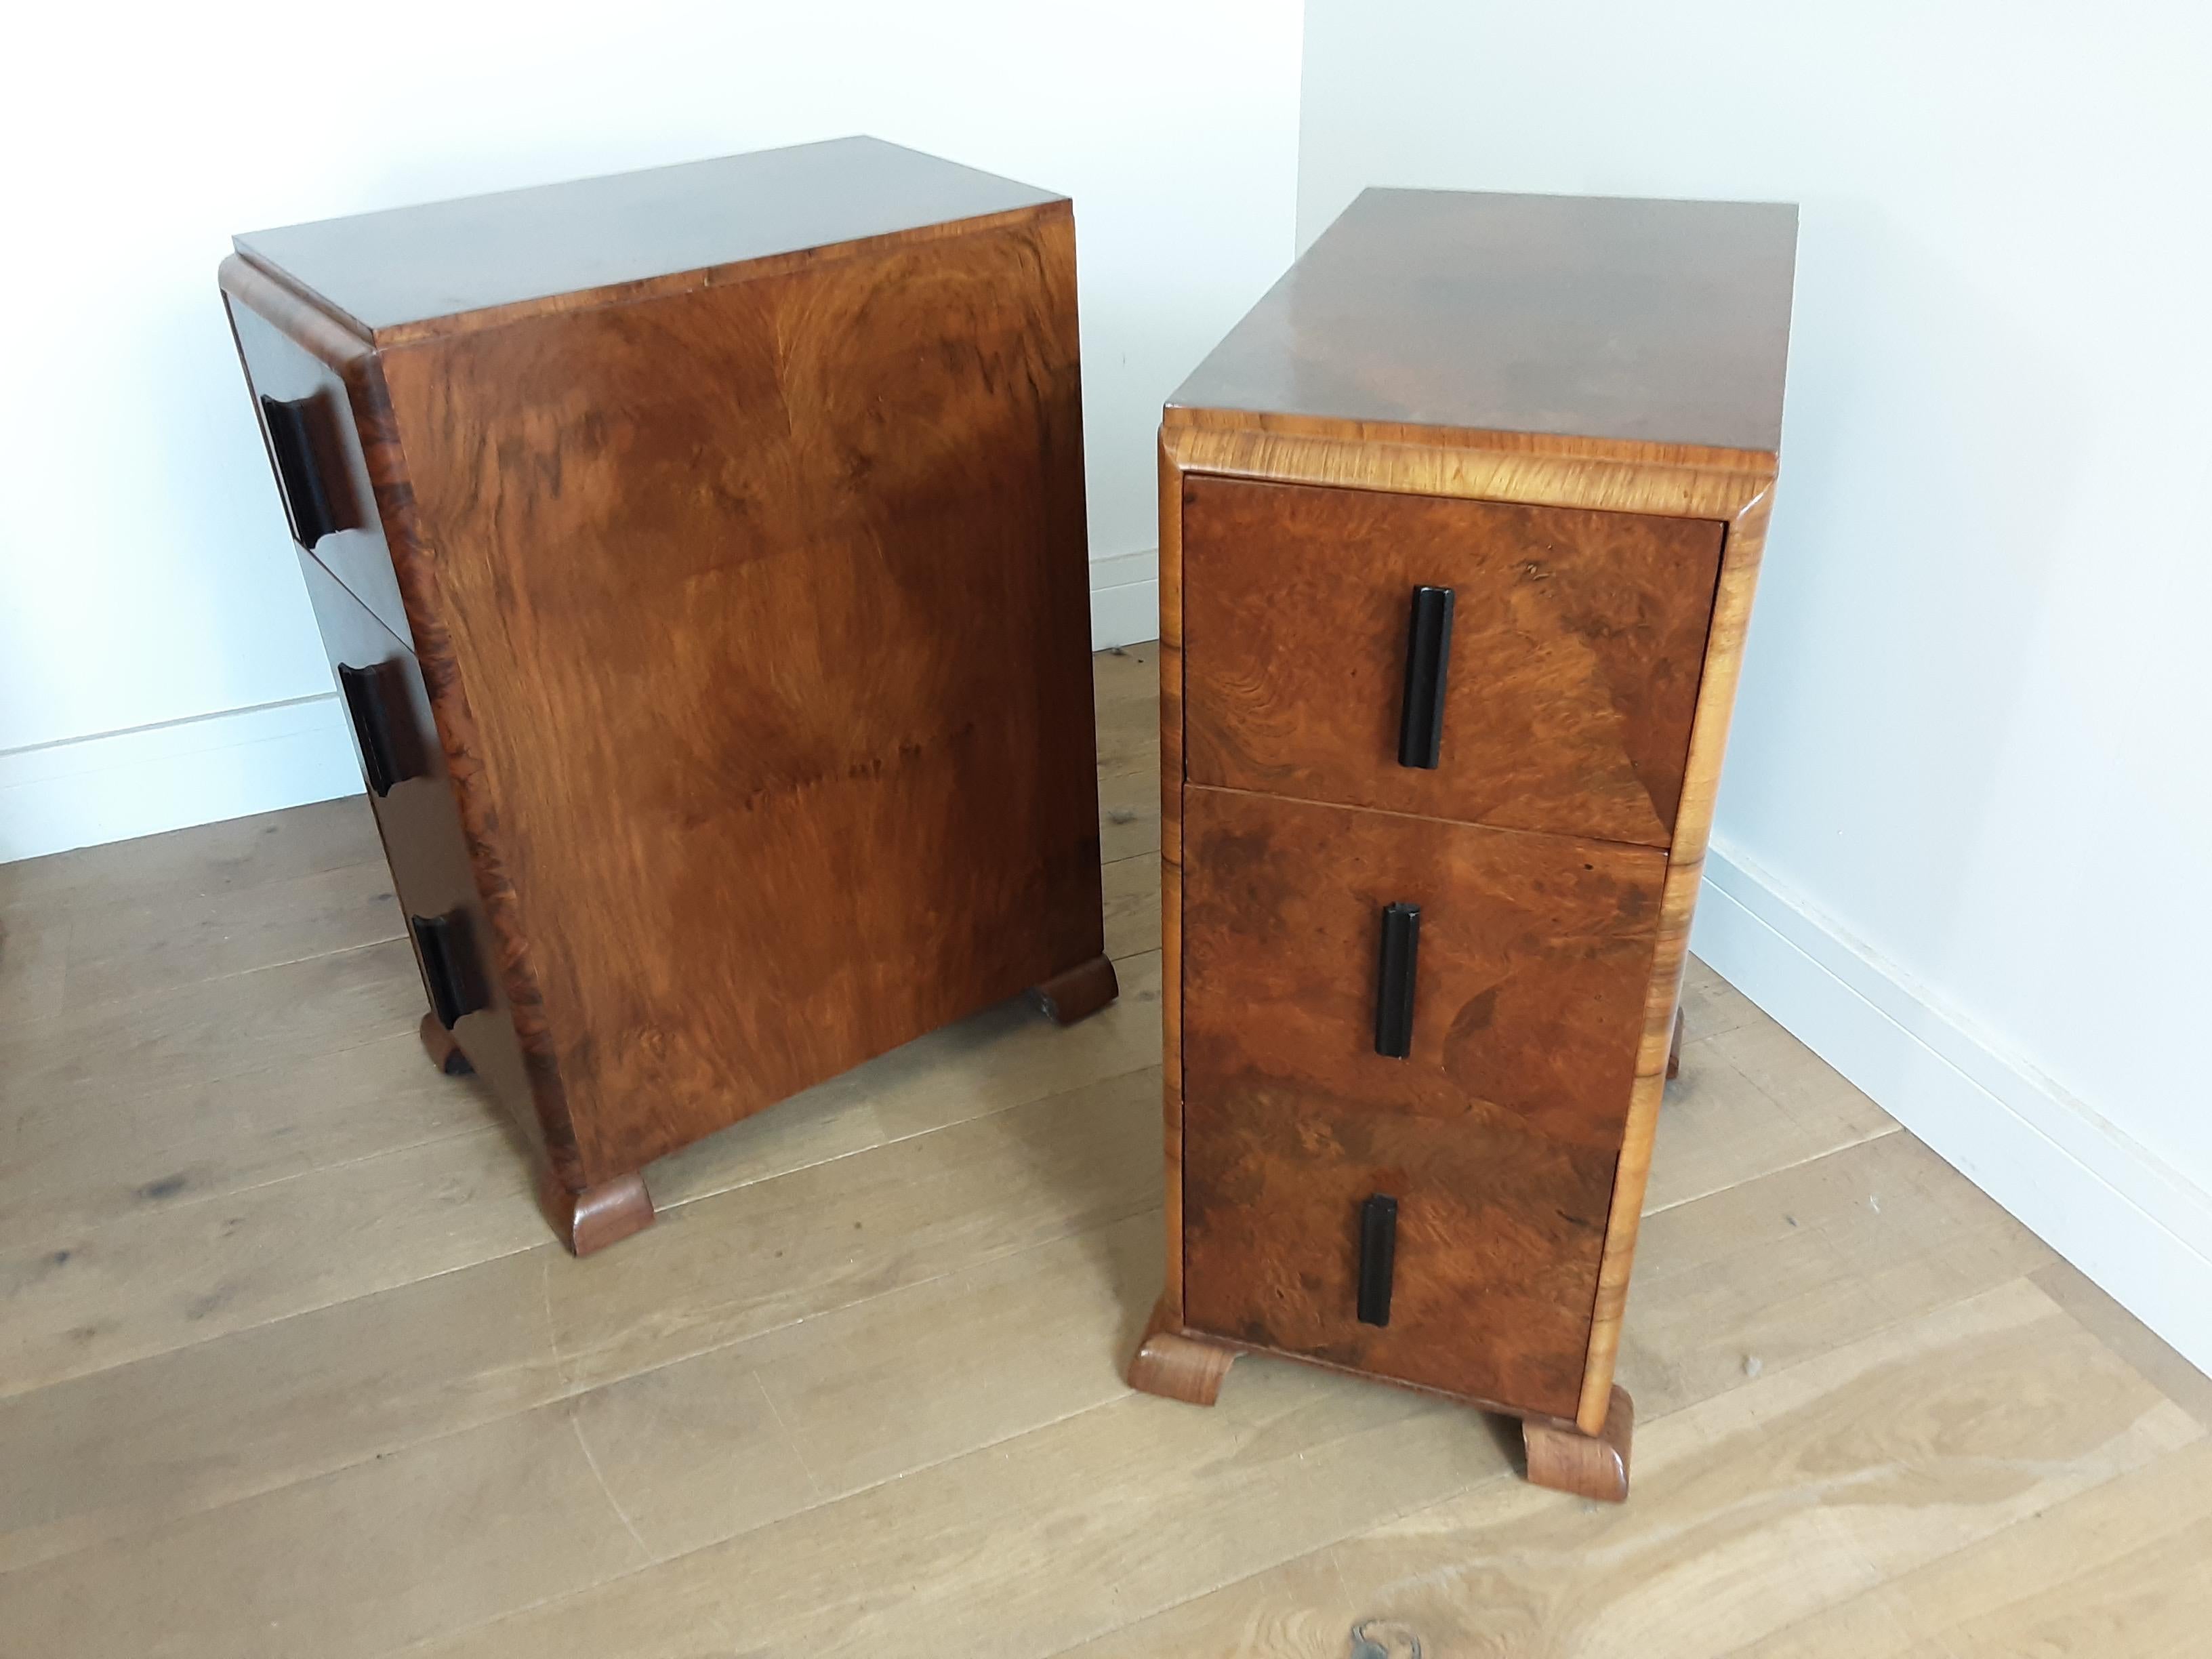 20th Century Pair of British Art Deco Bedside Cabinets Brown Burr Walnut from the 1930s